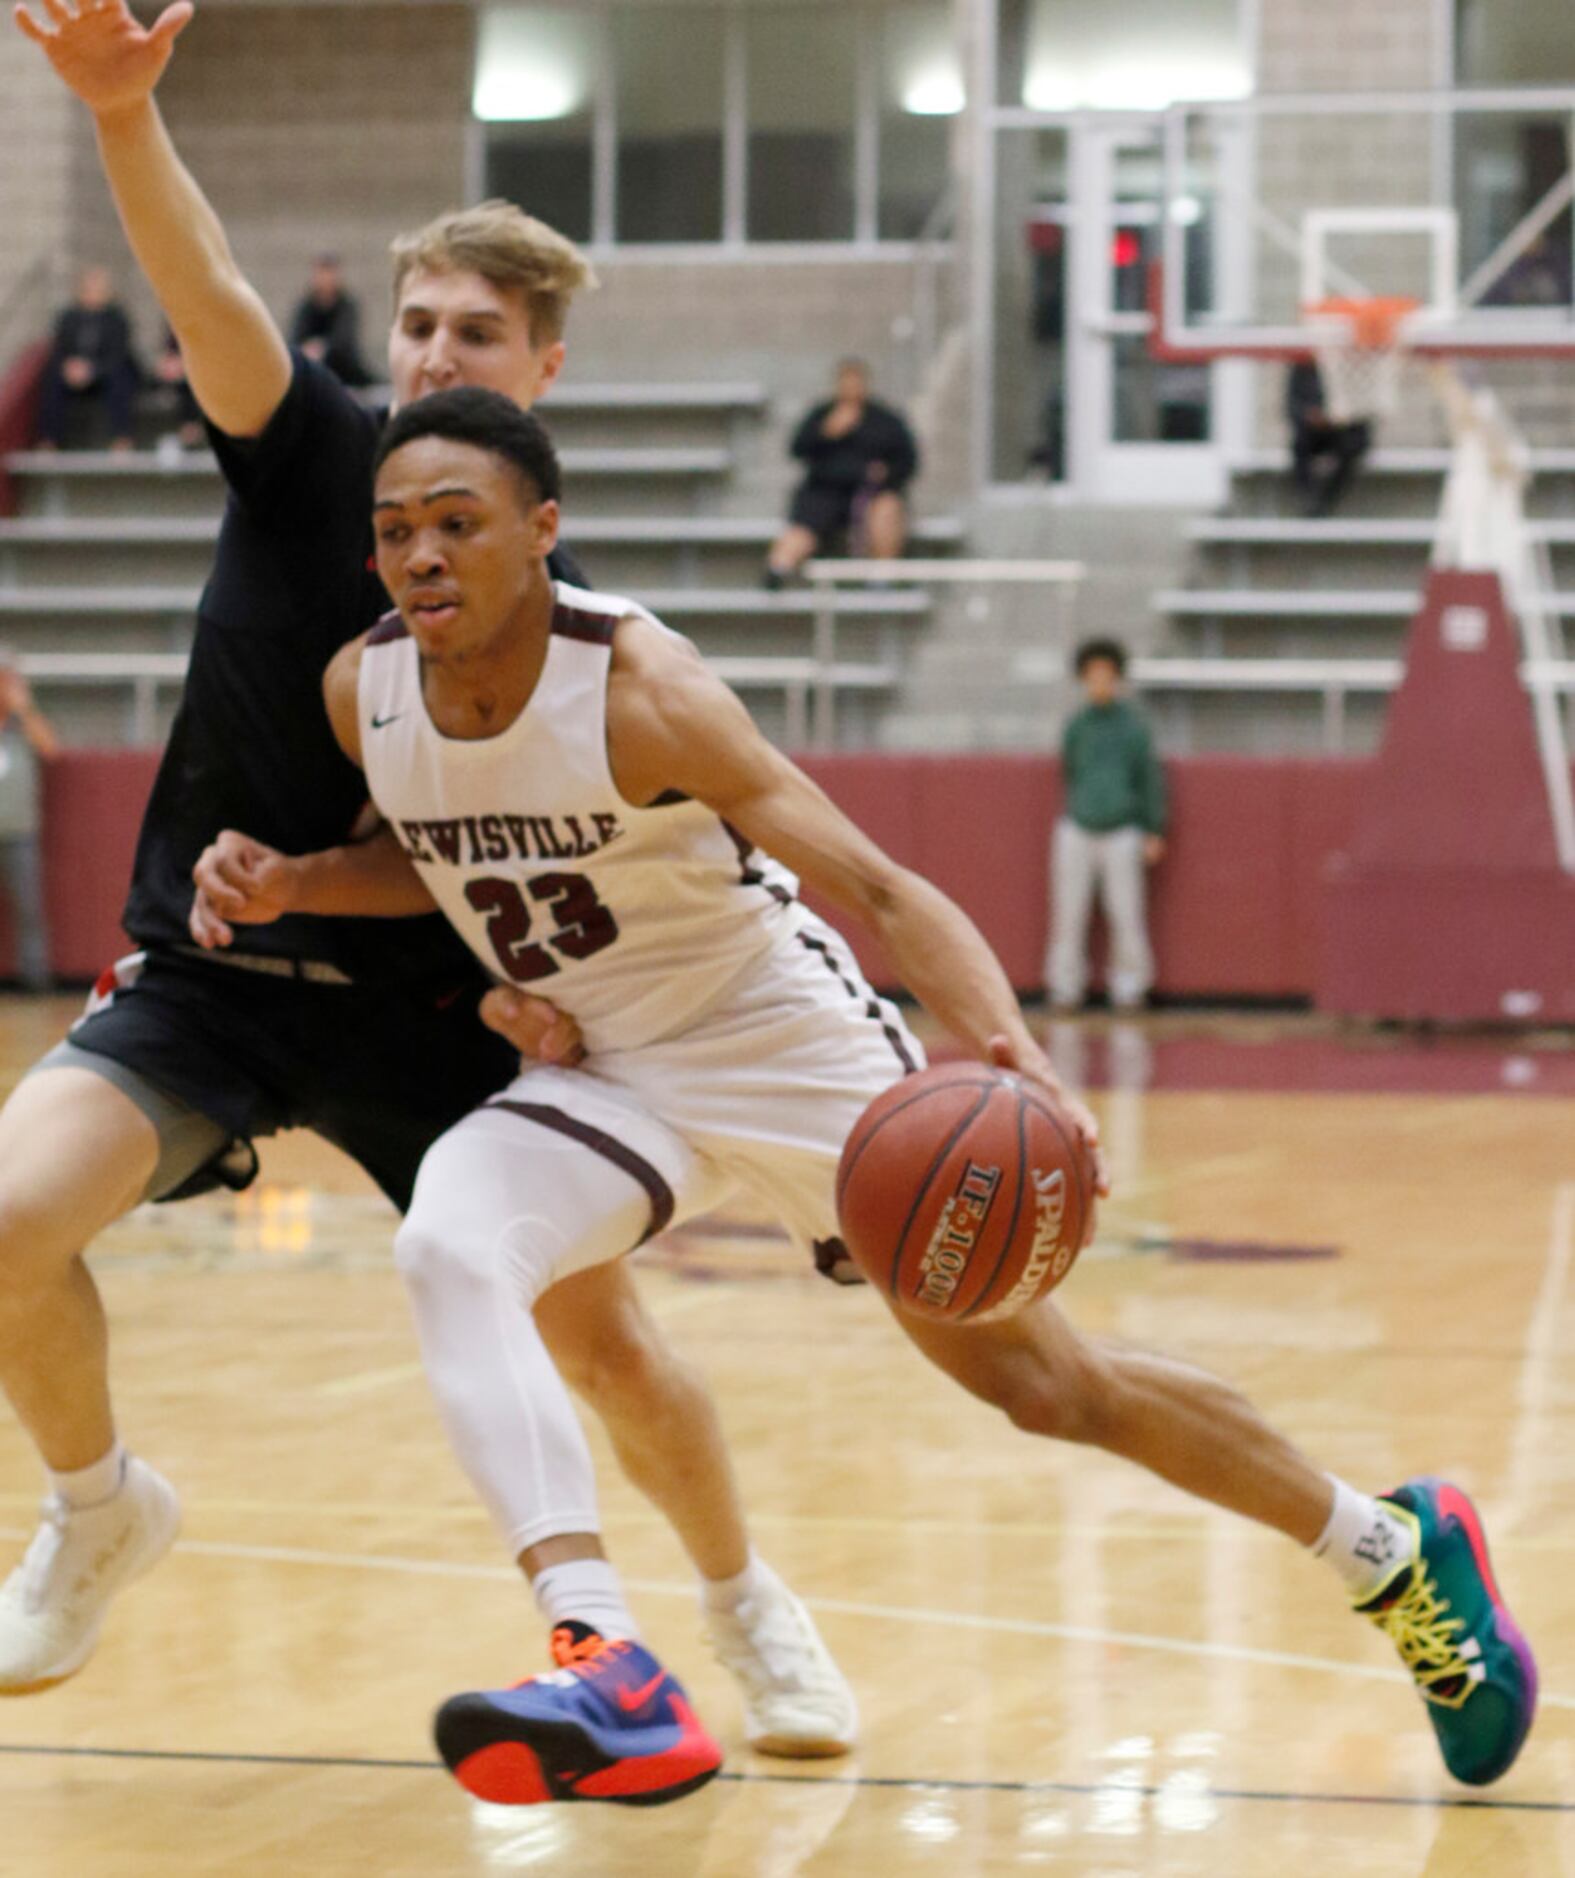 Lewisville's Kylin Green (23) drives hard to the basket as he is guarded by Coppell's Ben...